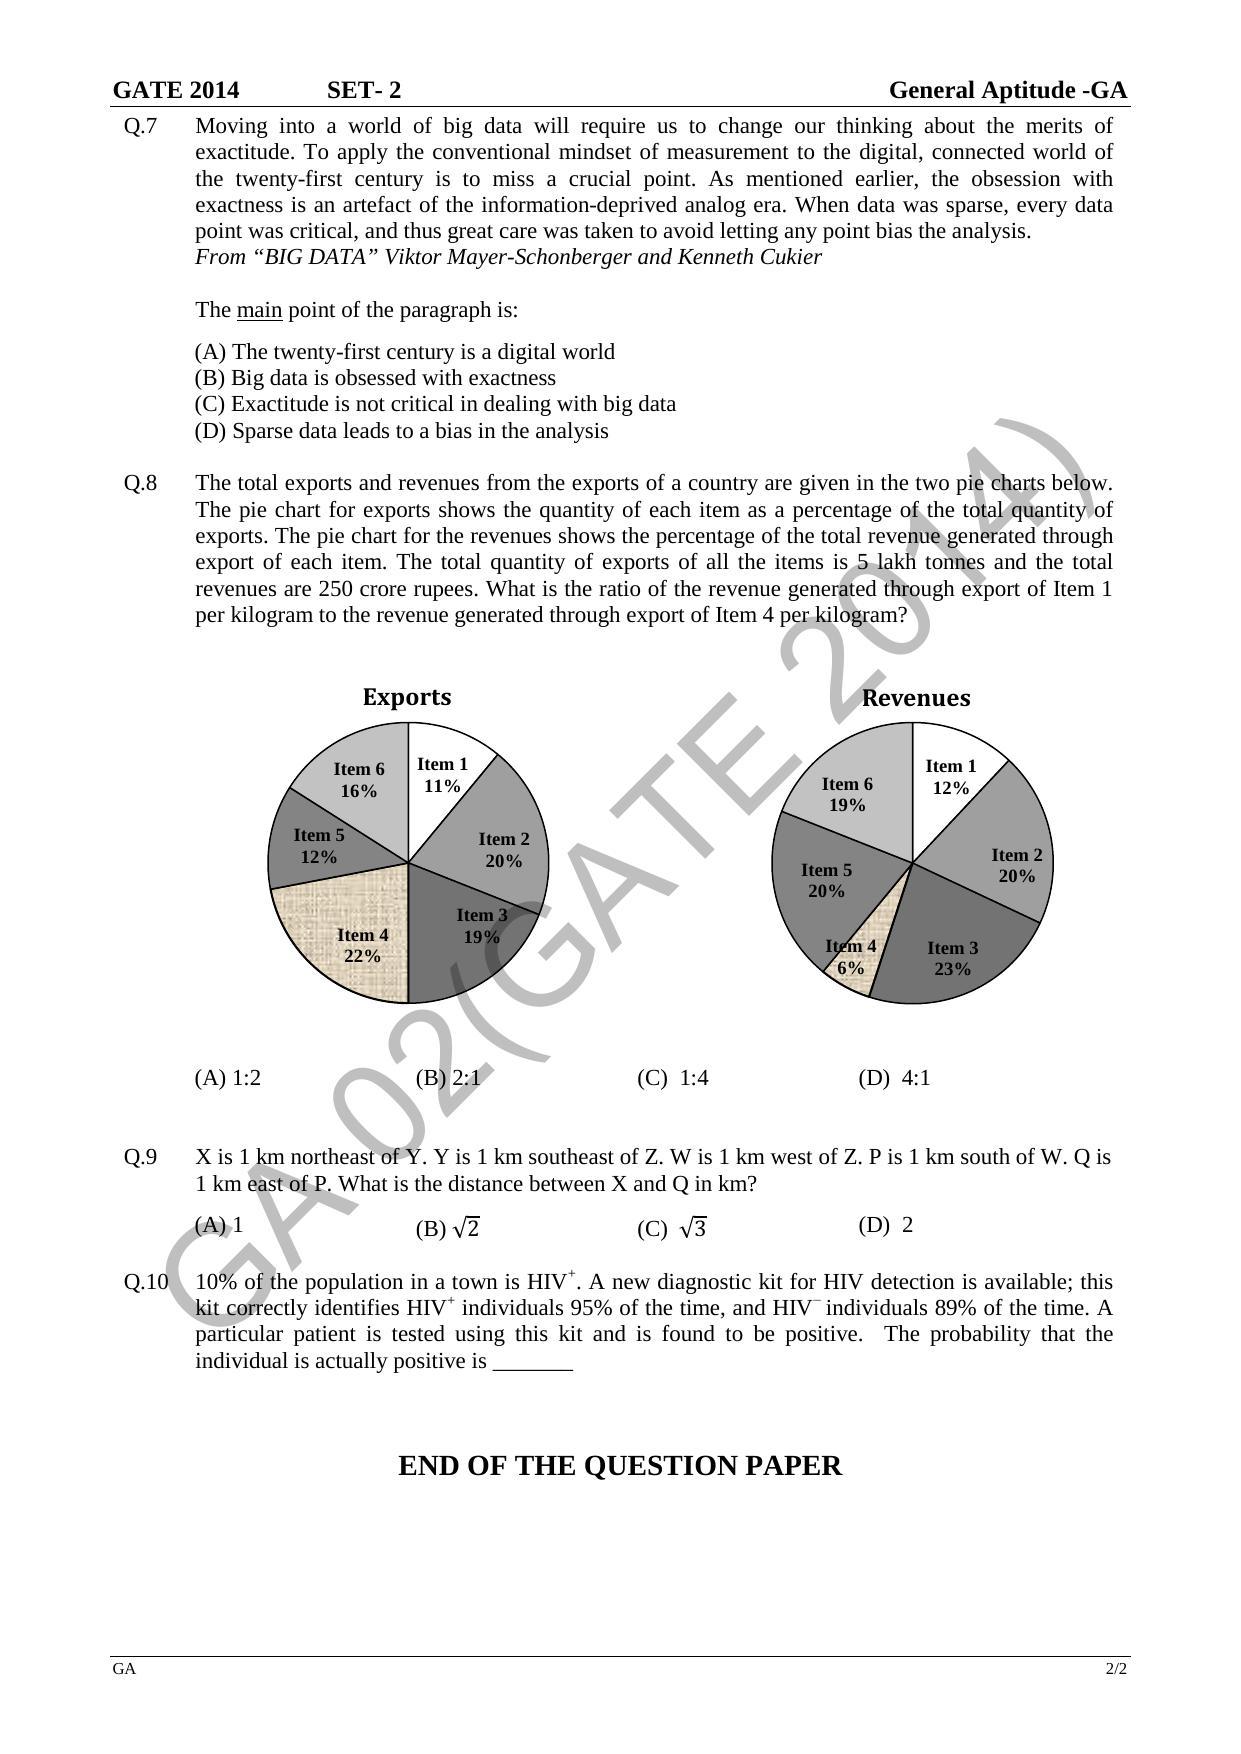 GATE 2014 Biotechnology (BT) Question Paper with Answer Key - Page 6